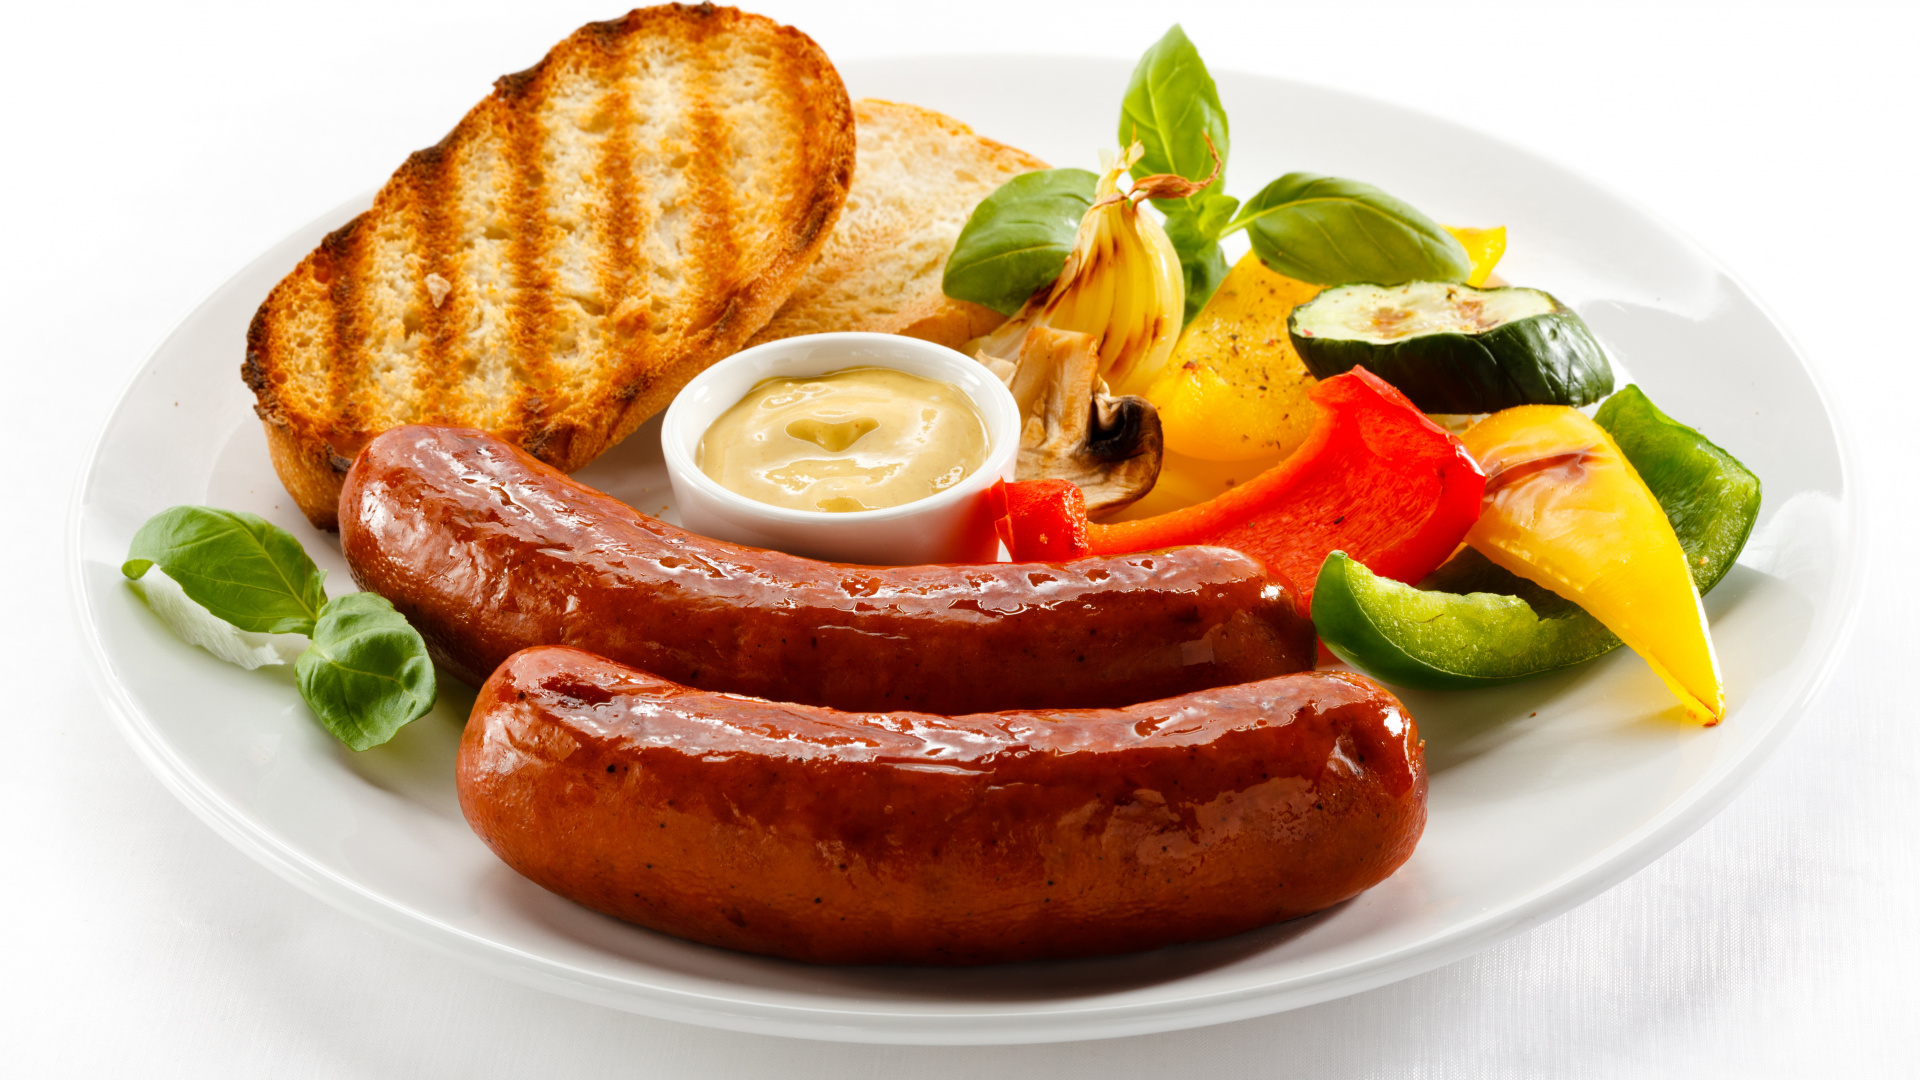 Sausage With Sliced Tomato and Cucumber on White Ceramic Plate. Wallpaper in 1920x1080 Resolution